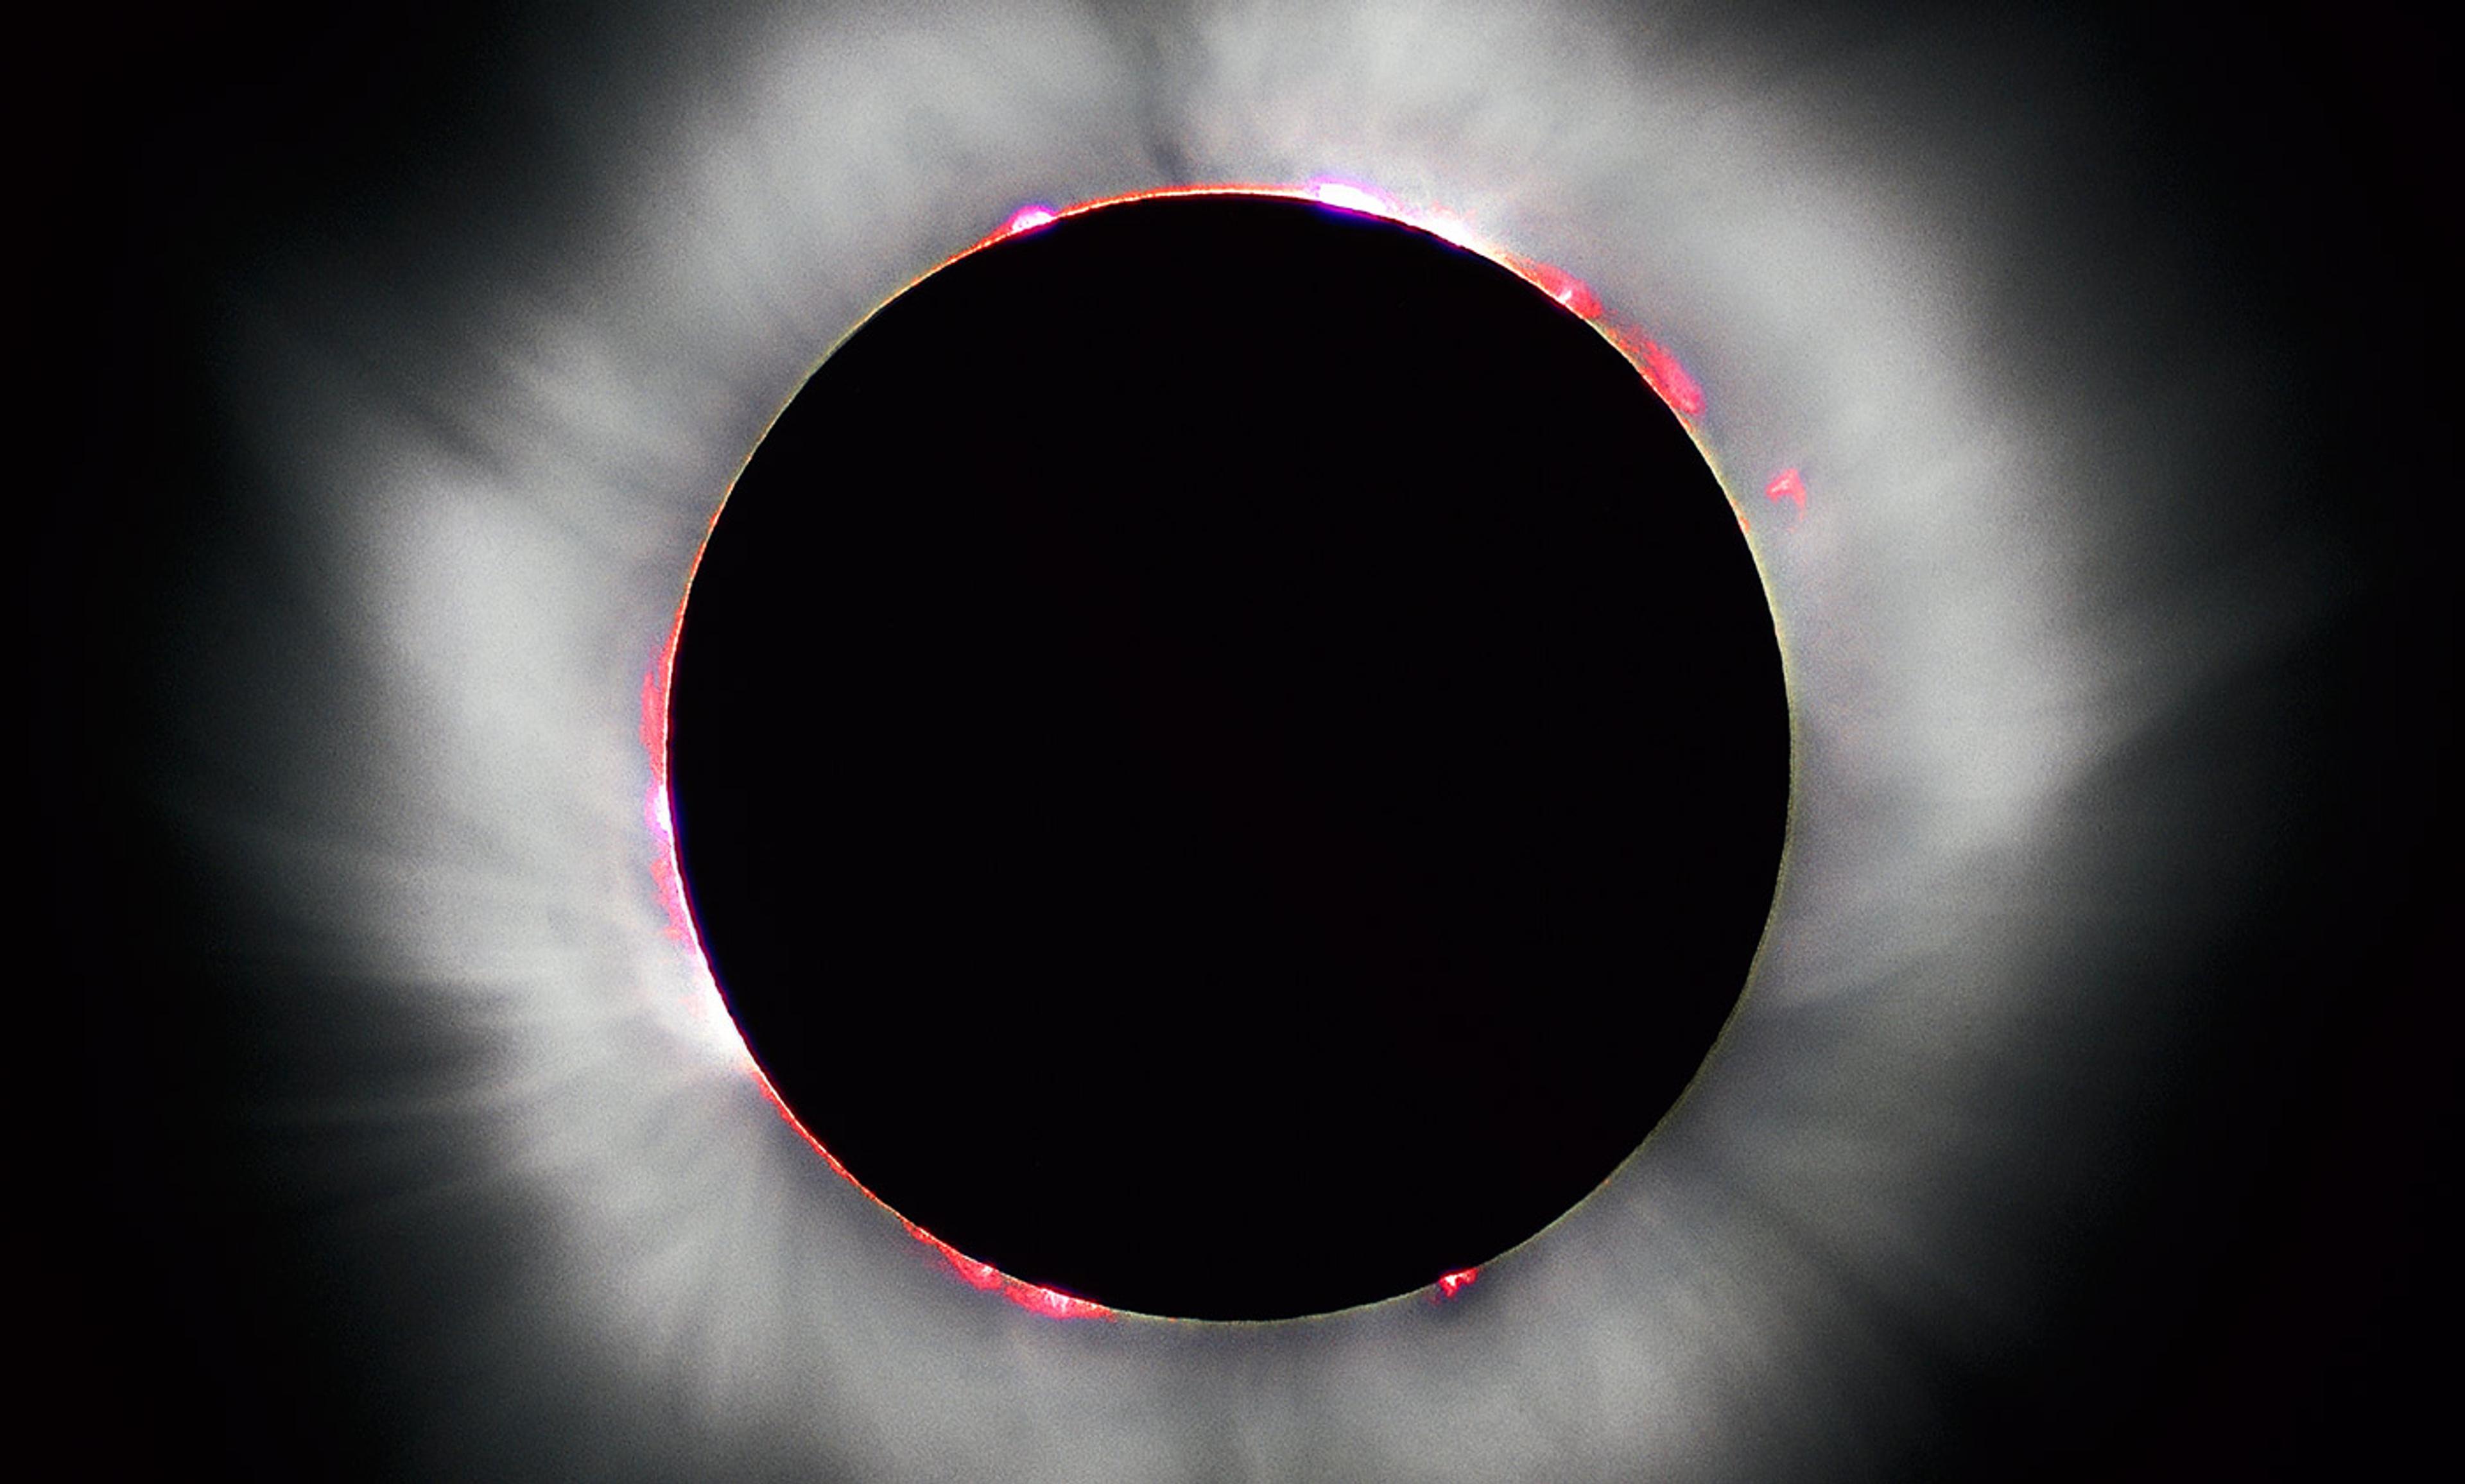 <p>In this view of the total solar eclipse from France in 1999, the spiky halo of light is the plasma from the Sun’s corona. <em>Photo courtesy Luc Viatour/Wikimedia</em></p>